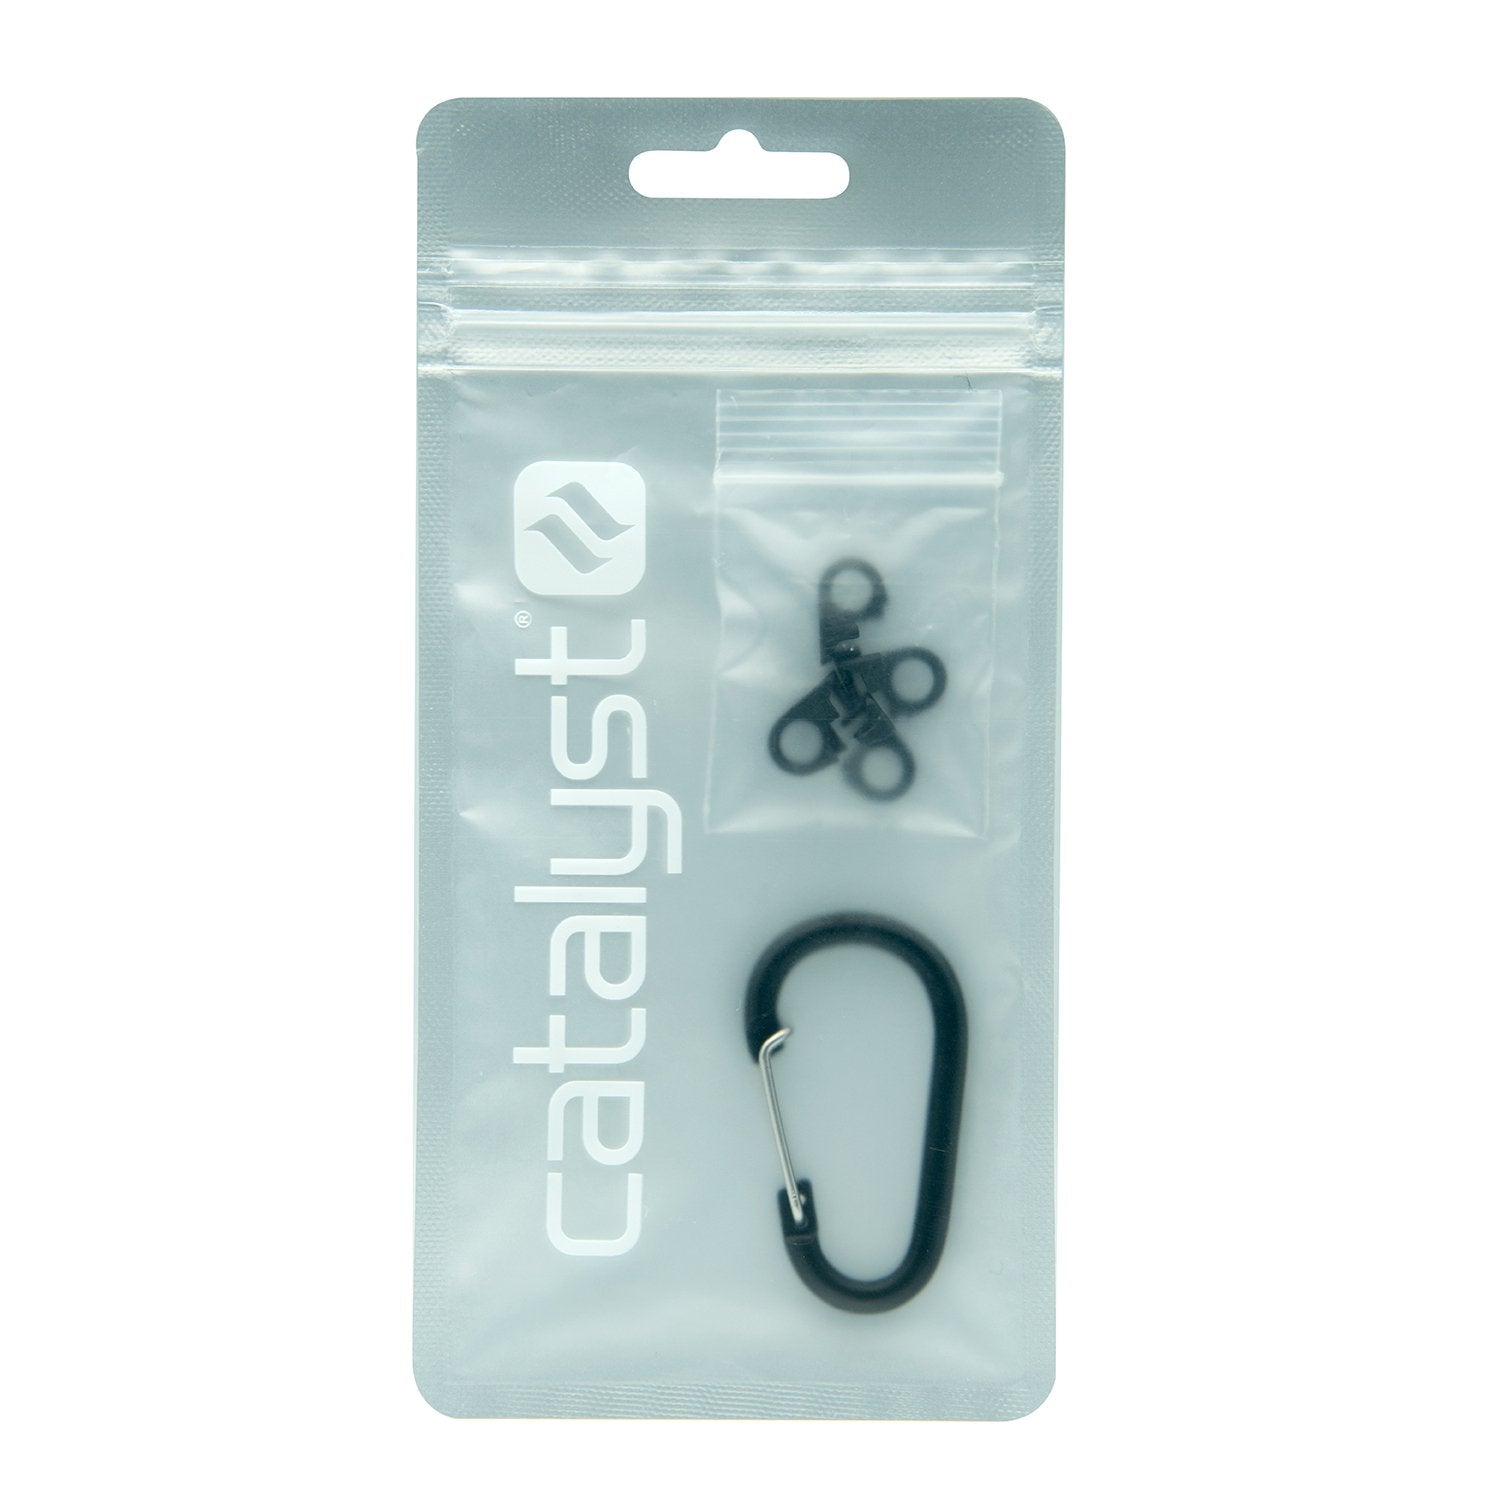 Catalyst carabiner attachment inside packaging